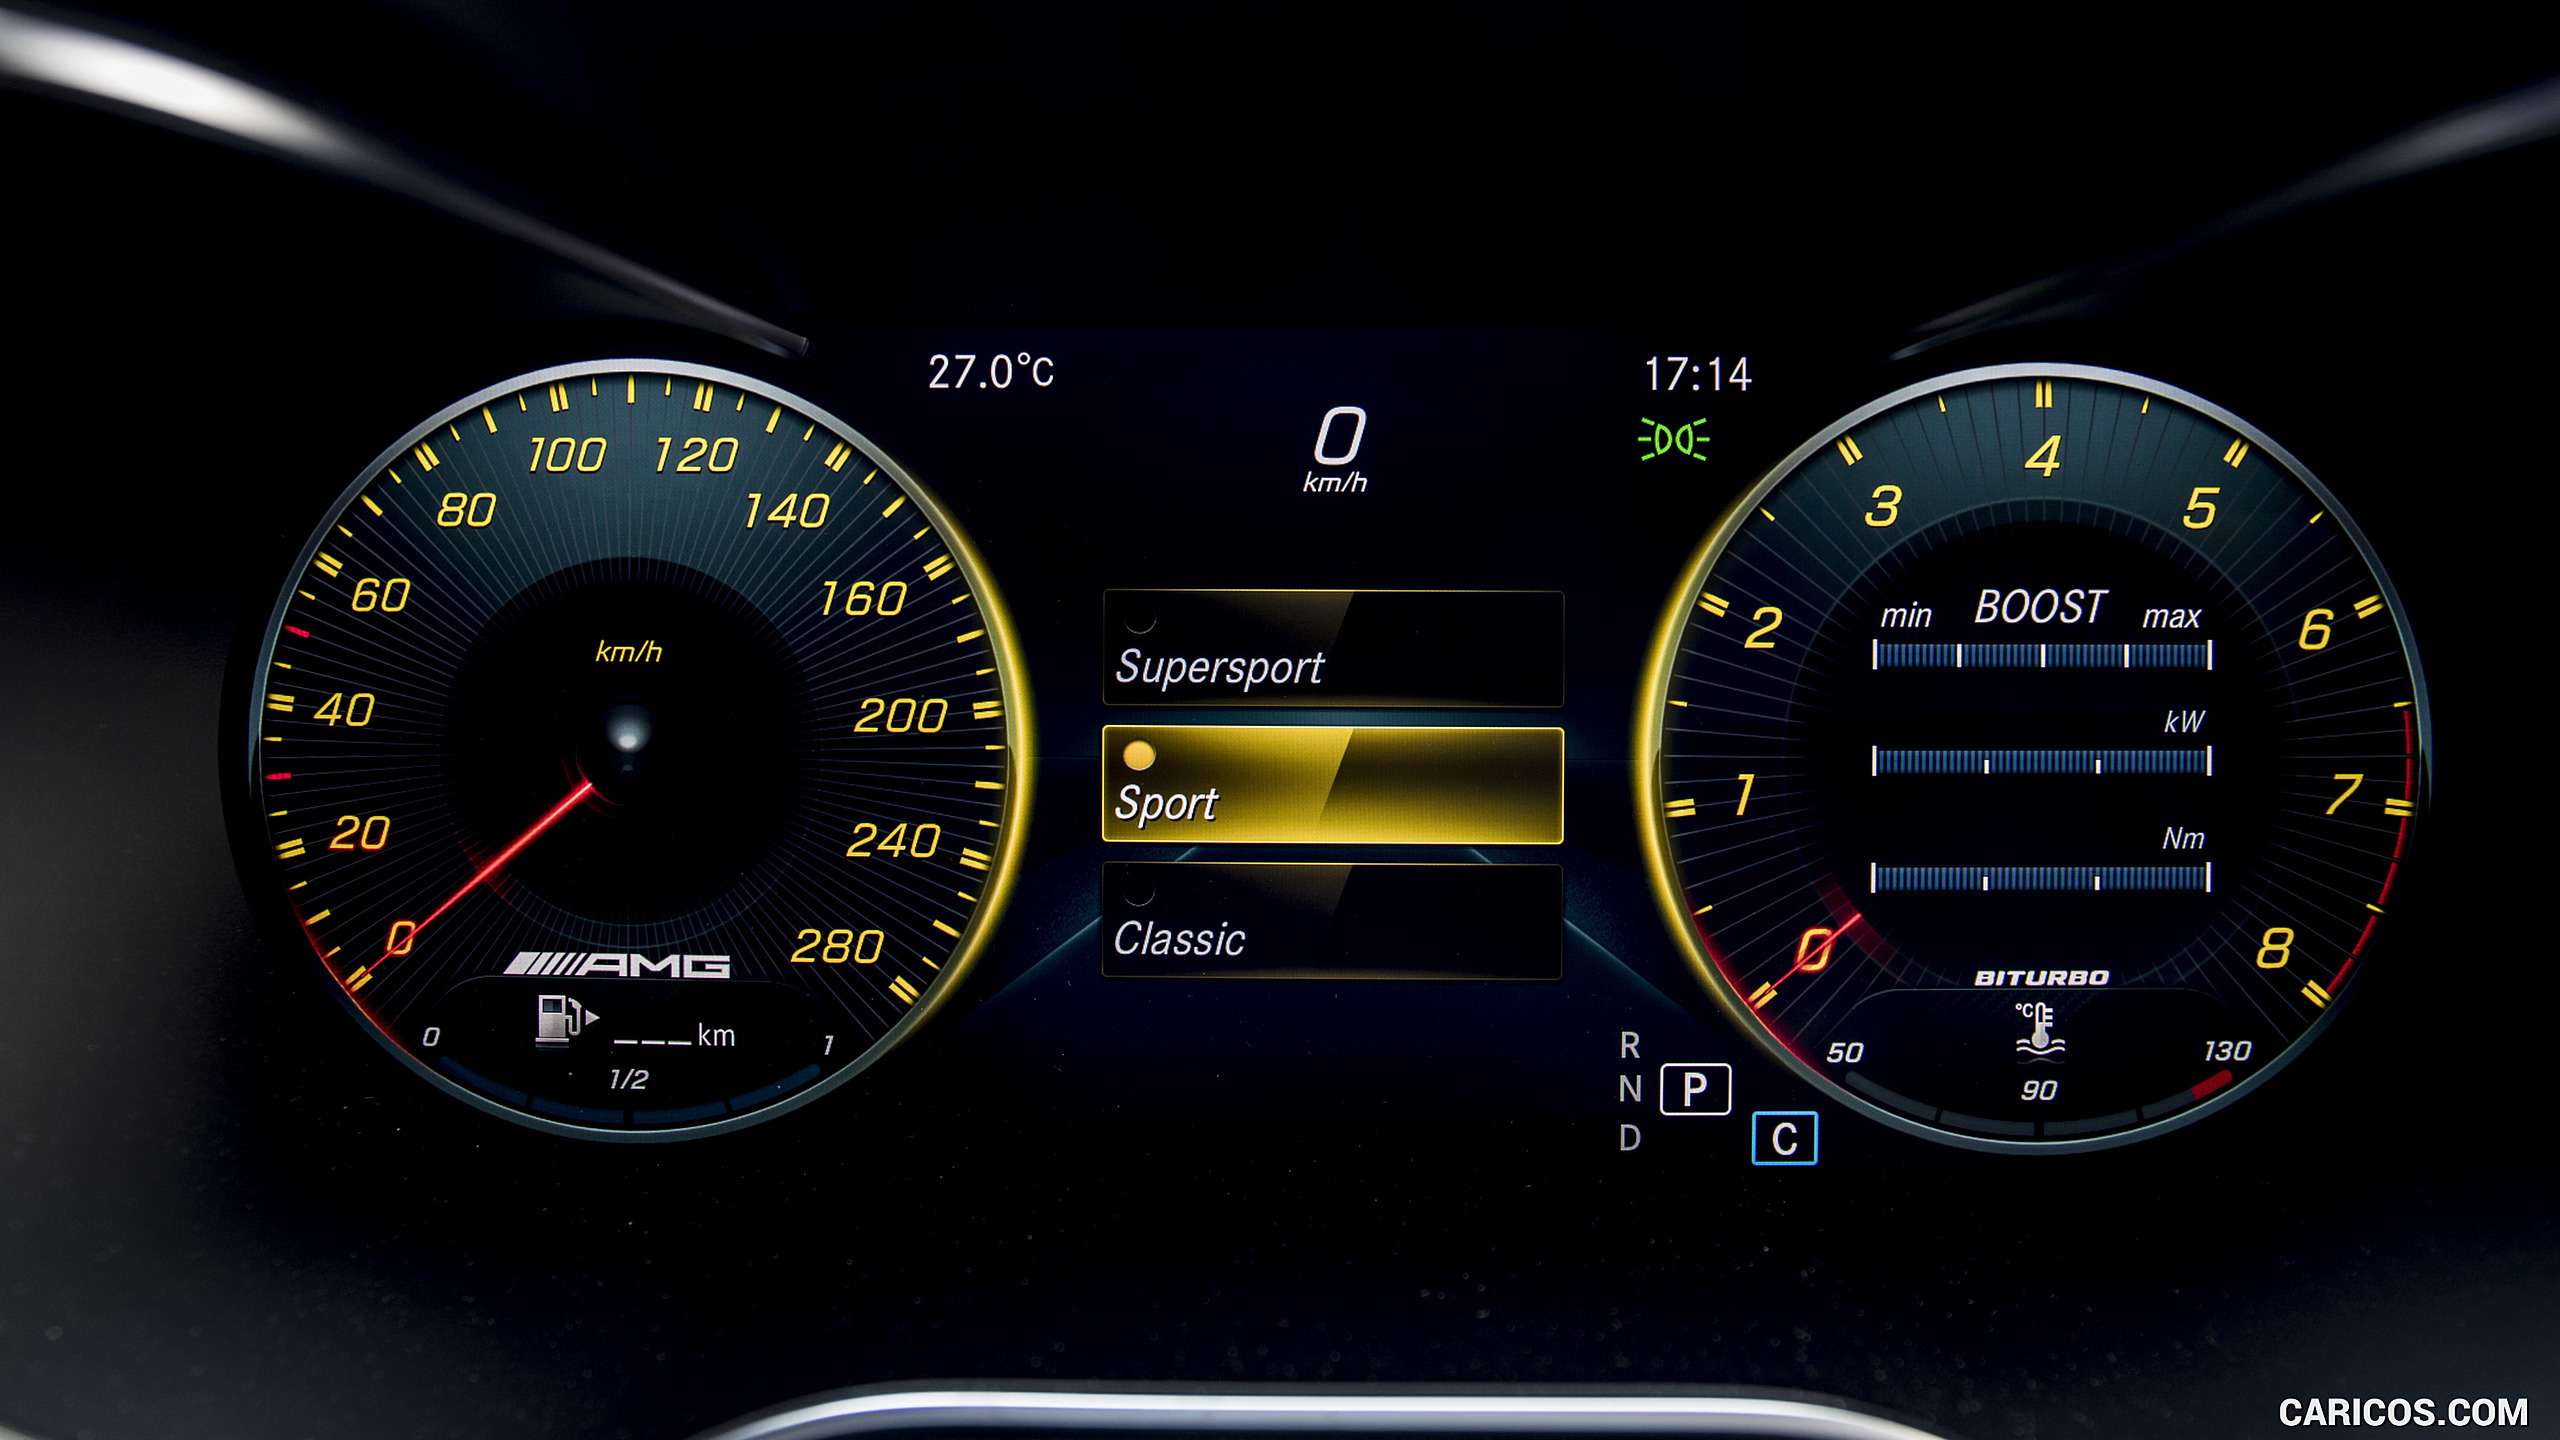 2019 Mercedes-AMG C43 4MATIC Coupe - Digital Instrument Cluster, #109 of 184